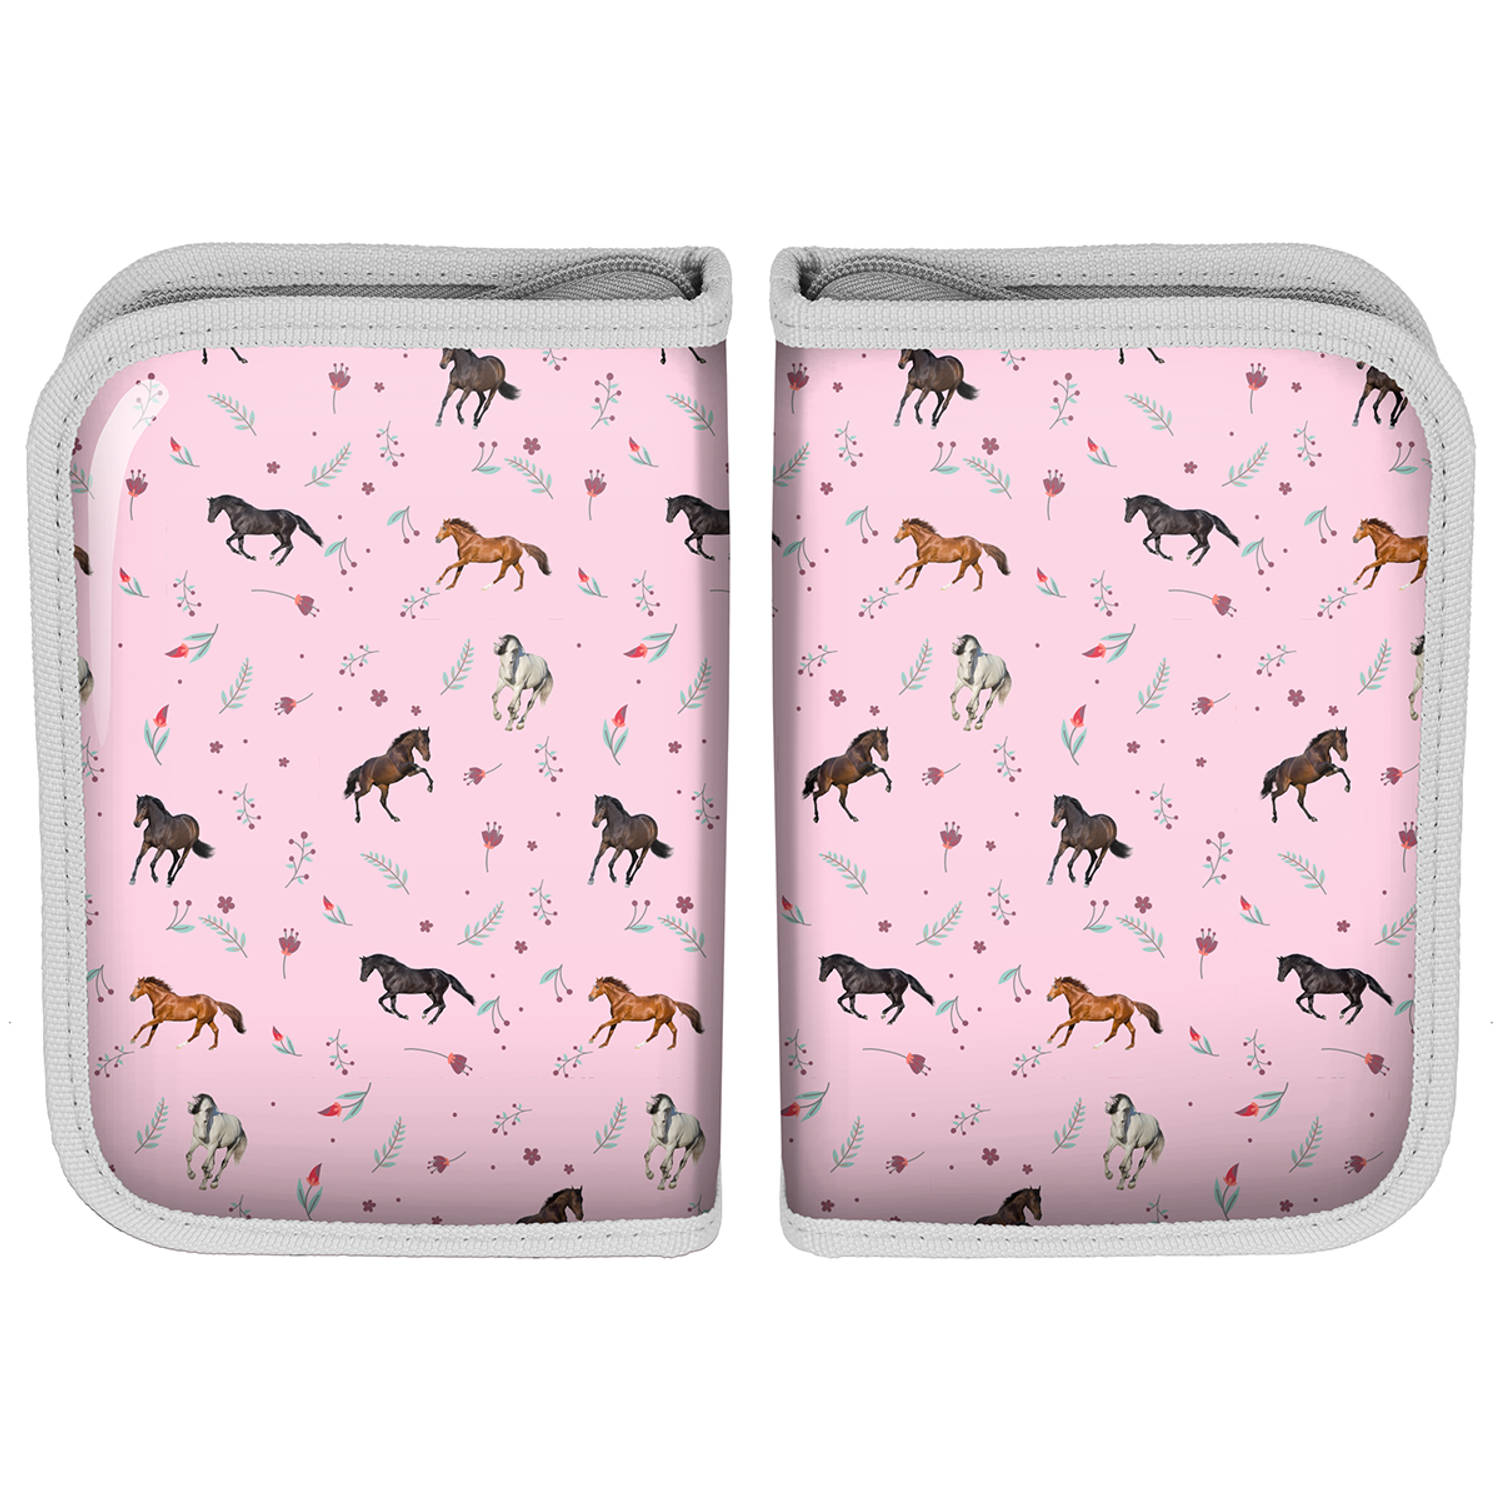 Animal Pictures Gevuld Etui Paardjes 19.5 X 13.5 Cm 22 St. Polyester